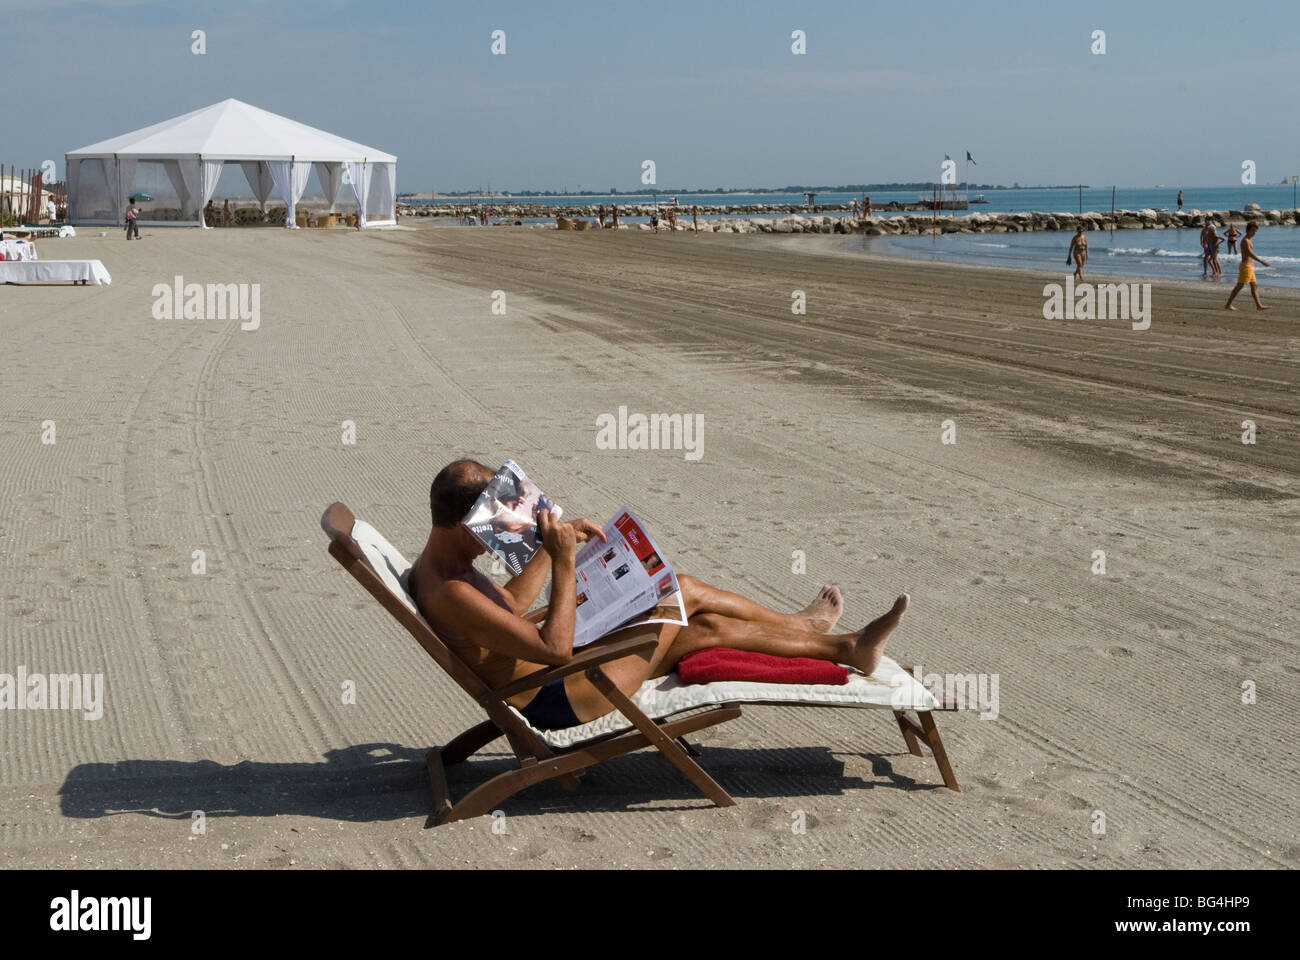 Italian holidaymaker, lone male on the beach, using a newspaper as a sun shield Venice Lido beach Italy. 2000s. HOMER SYKES Stock Photo